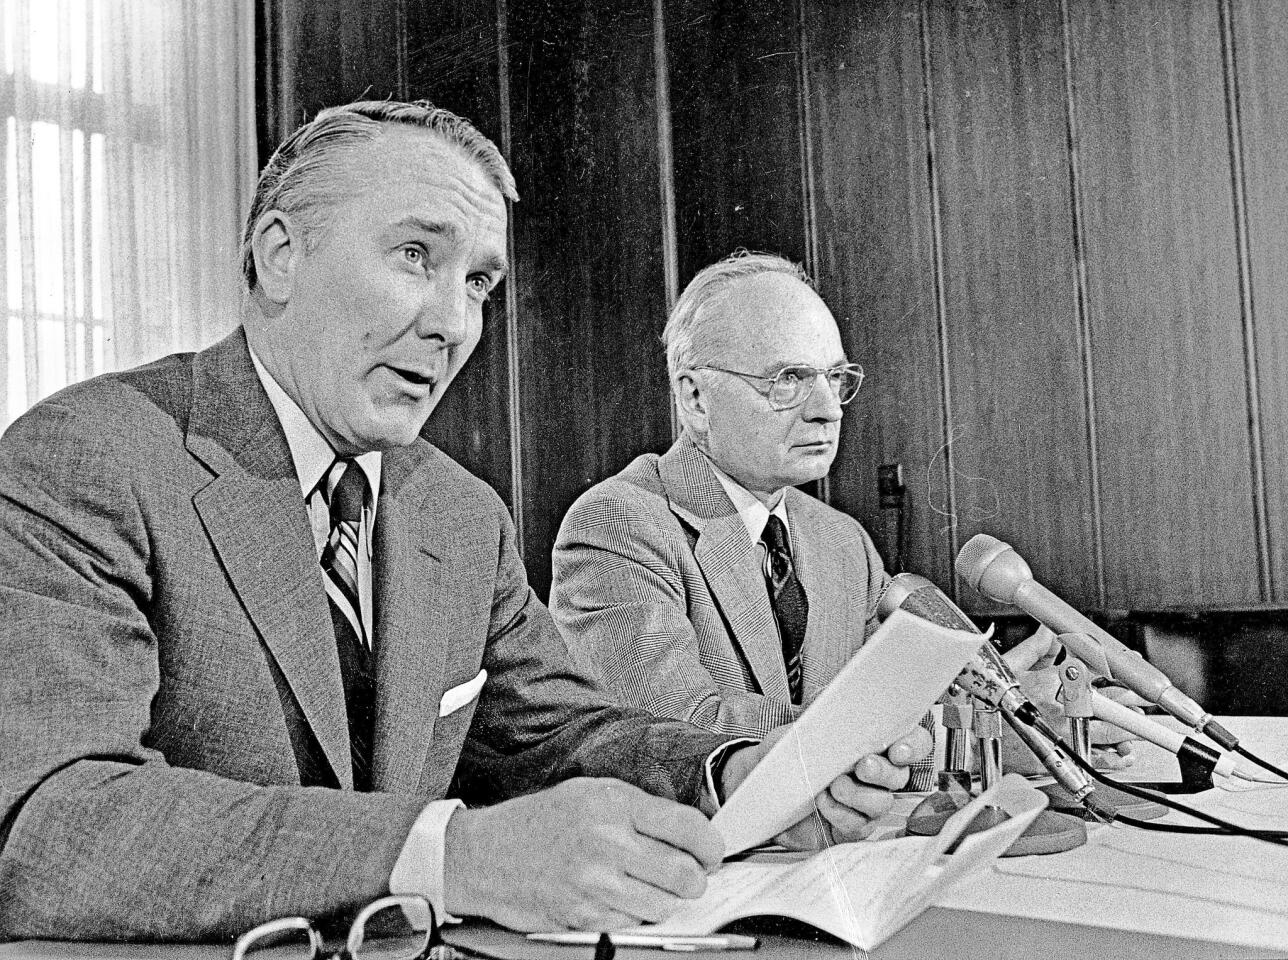 Tribune Co. CEO Stanton Cook, left, and Editor Clayton Kirkpatrick speak at an April 30, 1974, news conference on the Tribune's publication of Oval Office transcripts in the Watergate scandal. Cook, who was the newspaper's publisher, later backed an editorial that called for President Richard Nixon to resign. Cook died Sept. 3, 2015; he was 90.